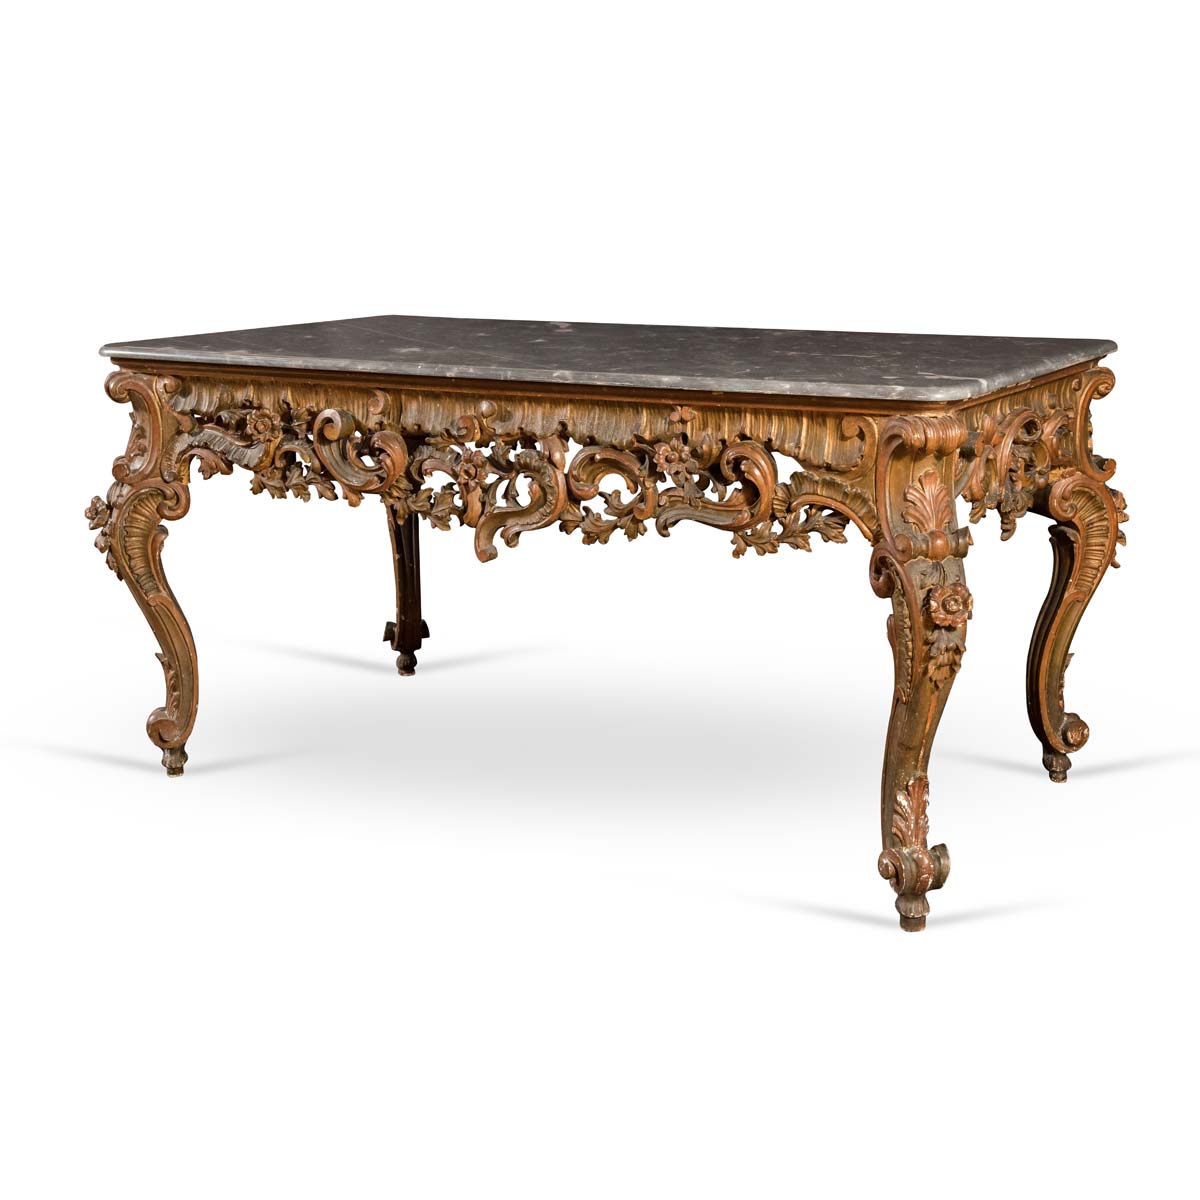 Carved, lacquered and partially gilt wood centre table, 20th Century.